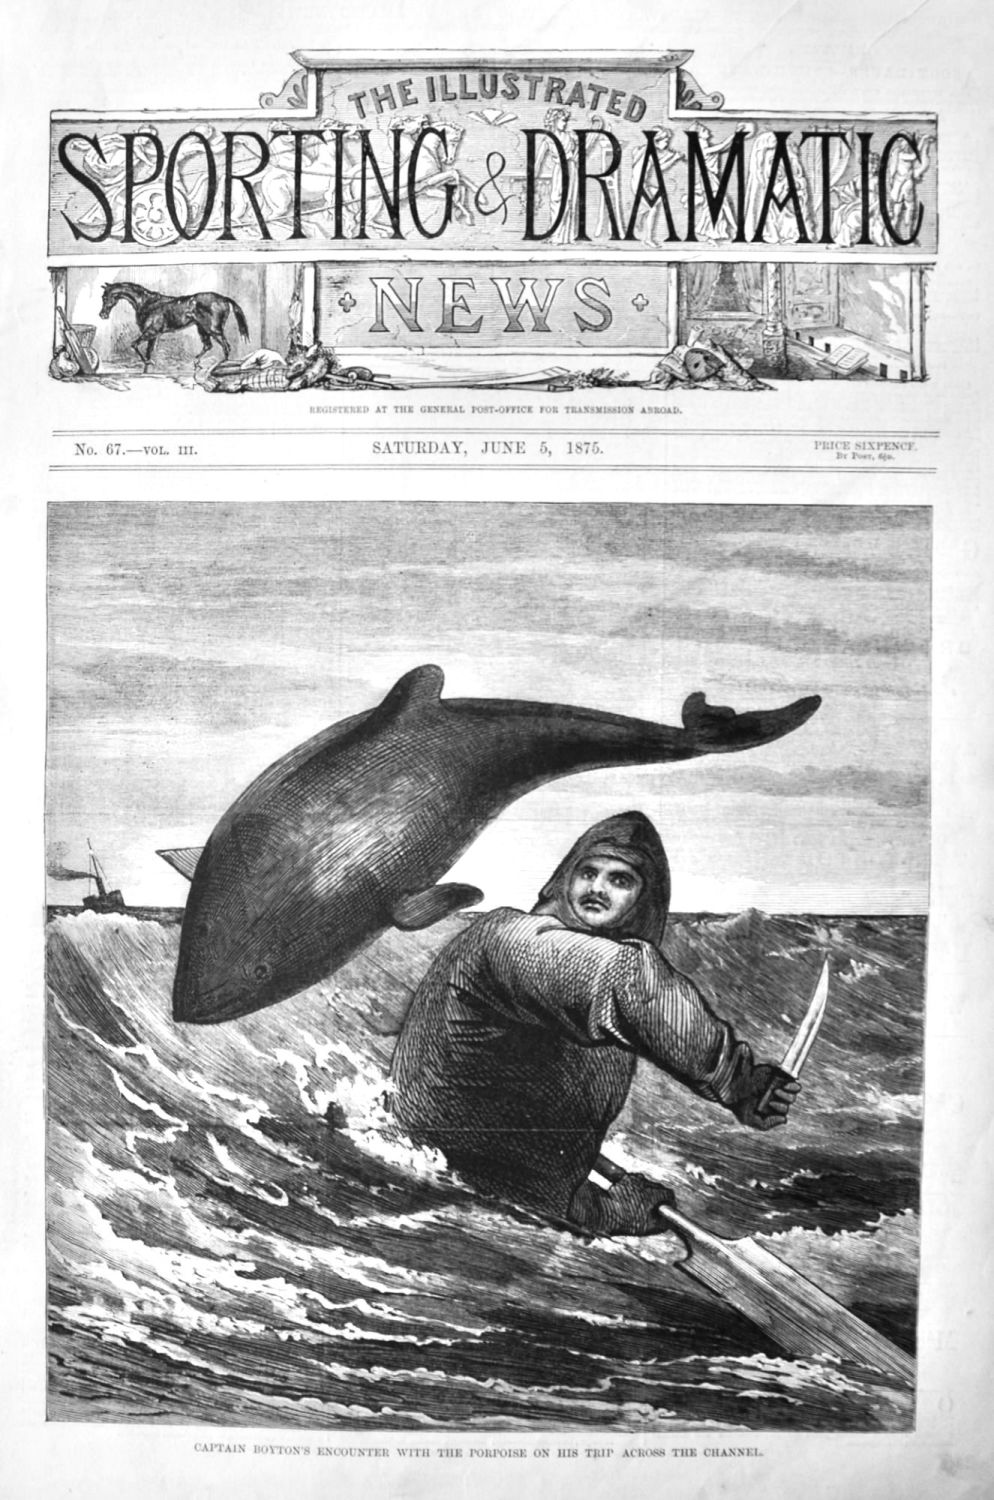 Captain Boyton's Encounter with the Porpoise on his Trip across the channel